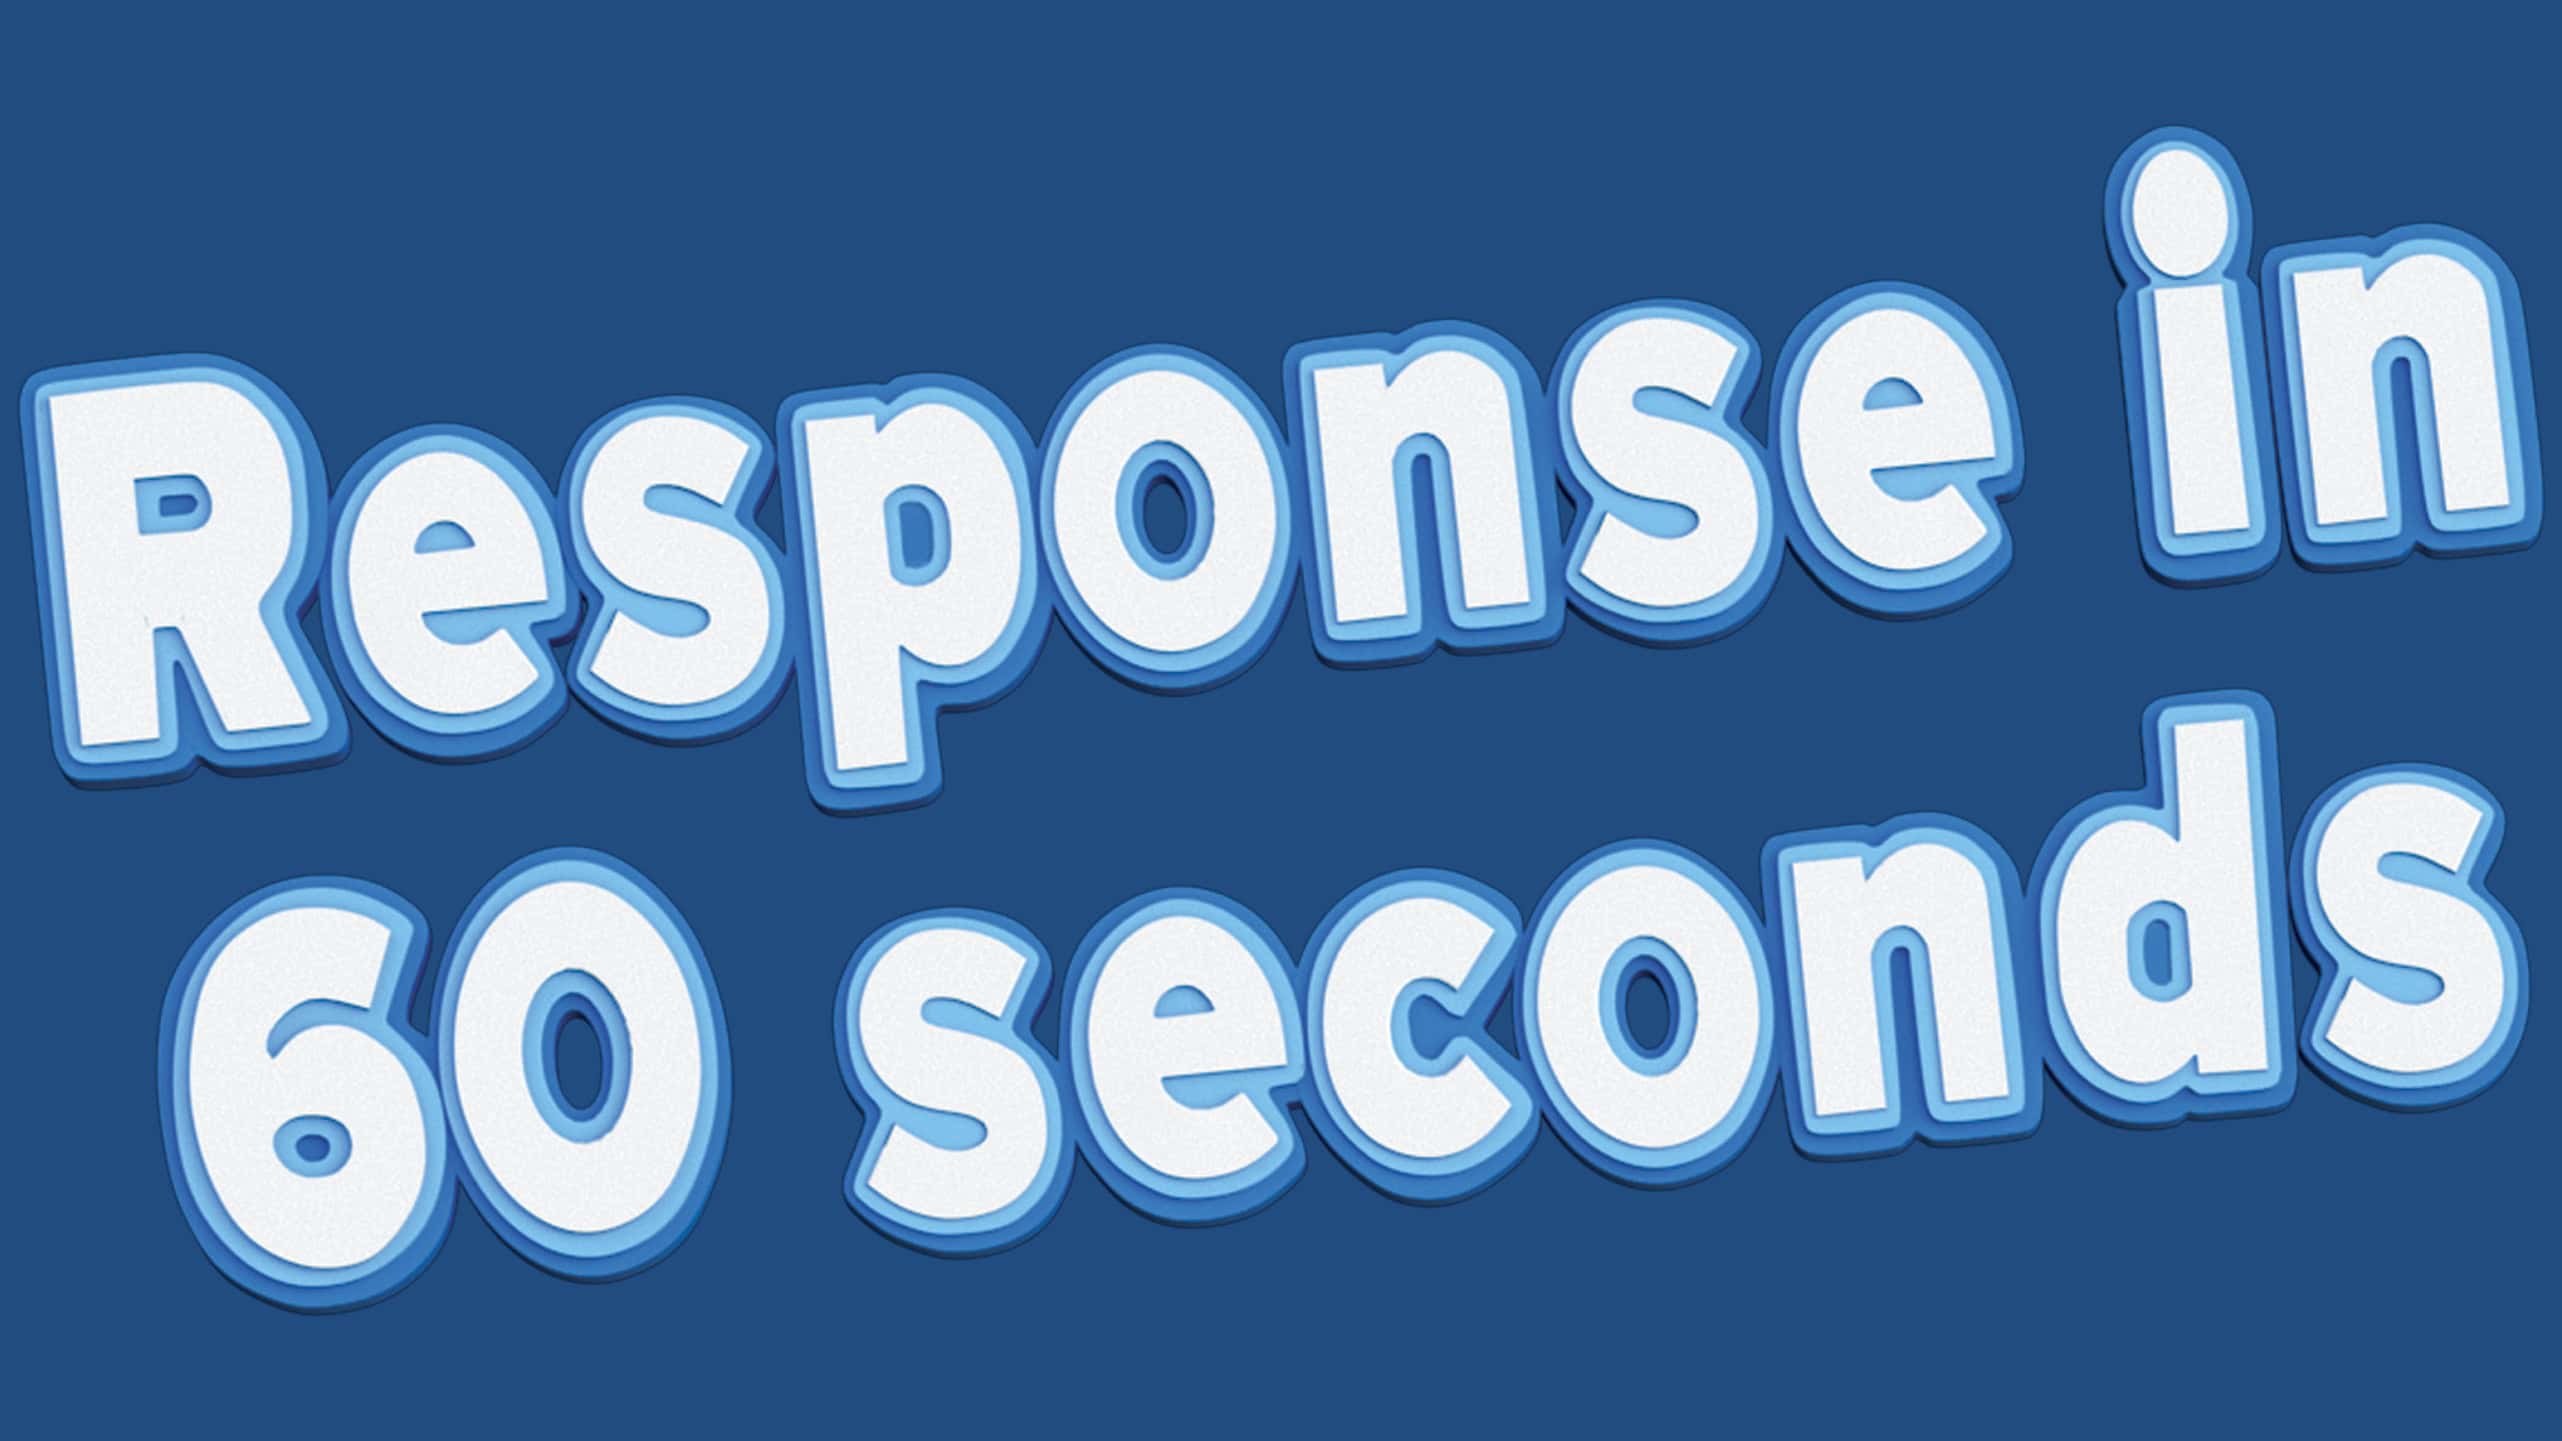 Branded 3D text in a bold, rounded style reading 'Response in 60 seconds'